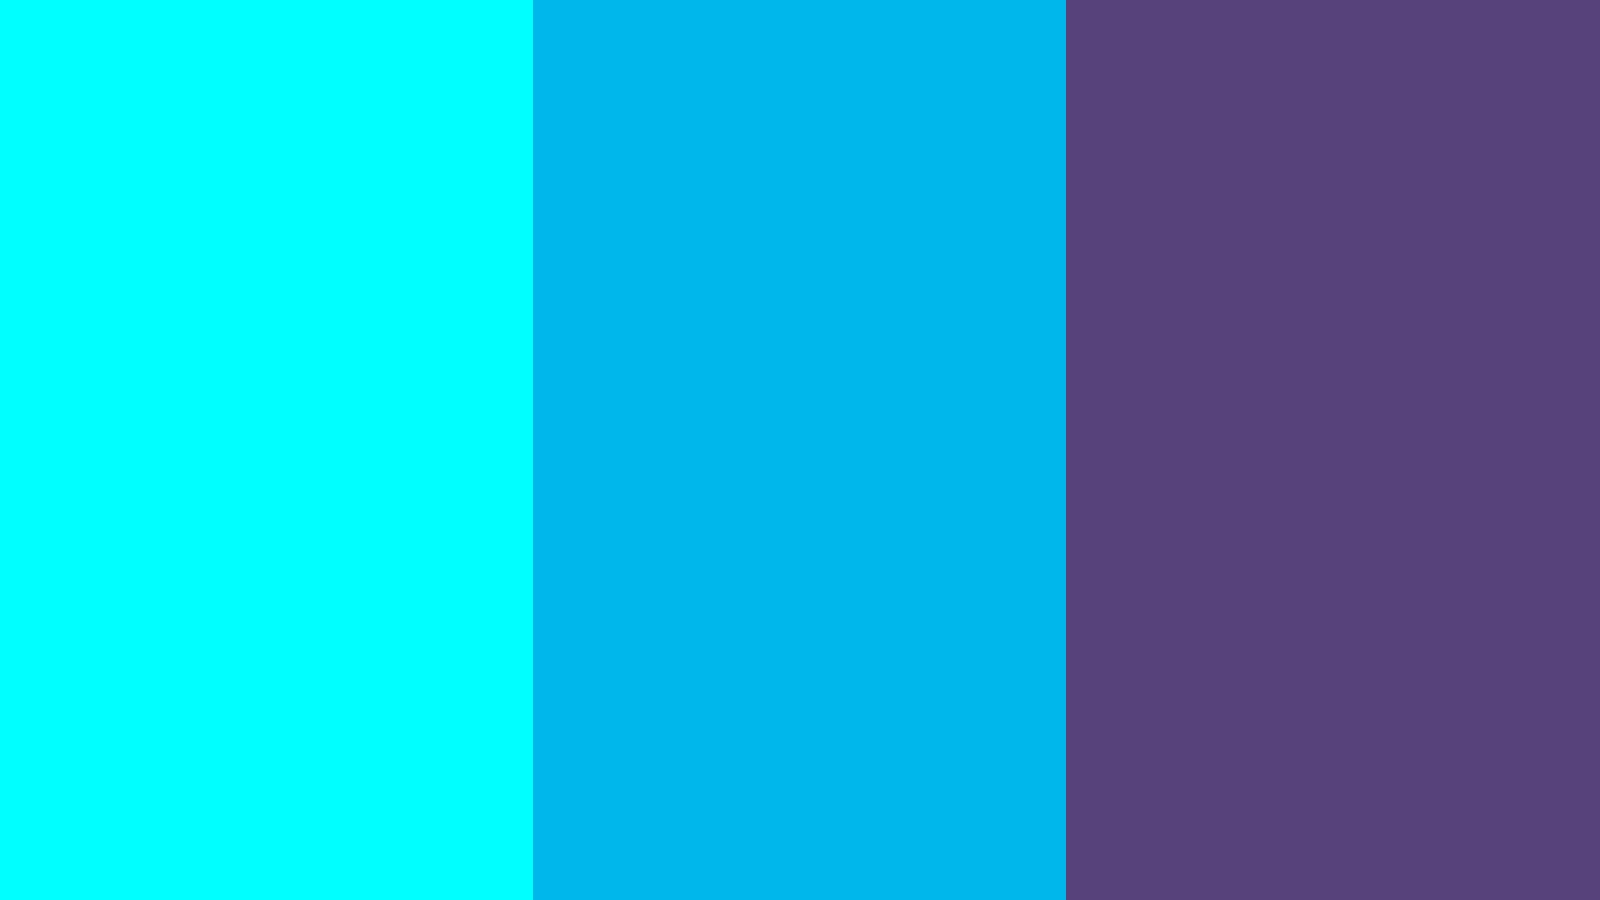 Cyan Cyan Process and Cyber Grape solid three color background